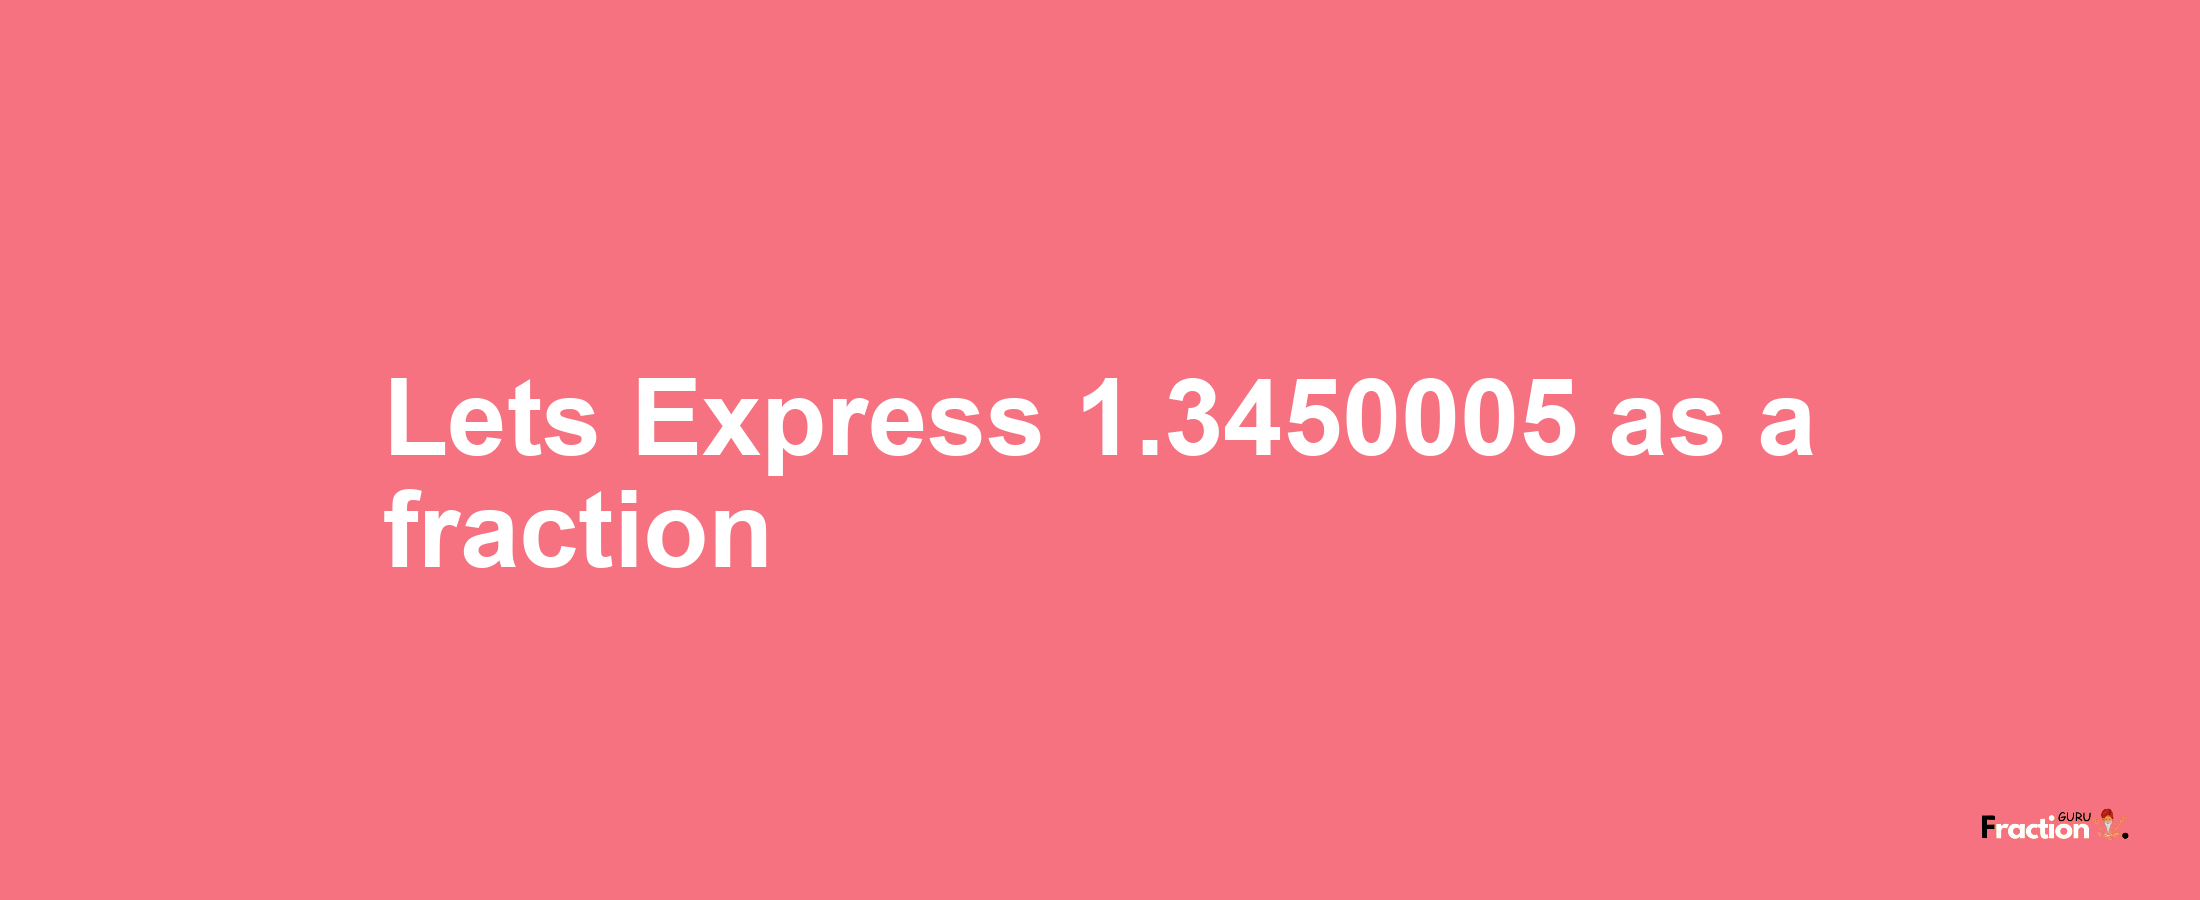 Lets Express 1.3450005 as afraction